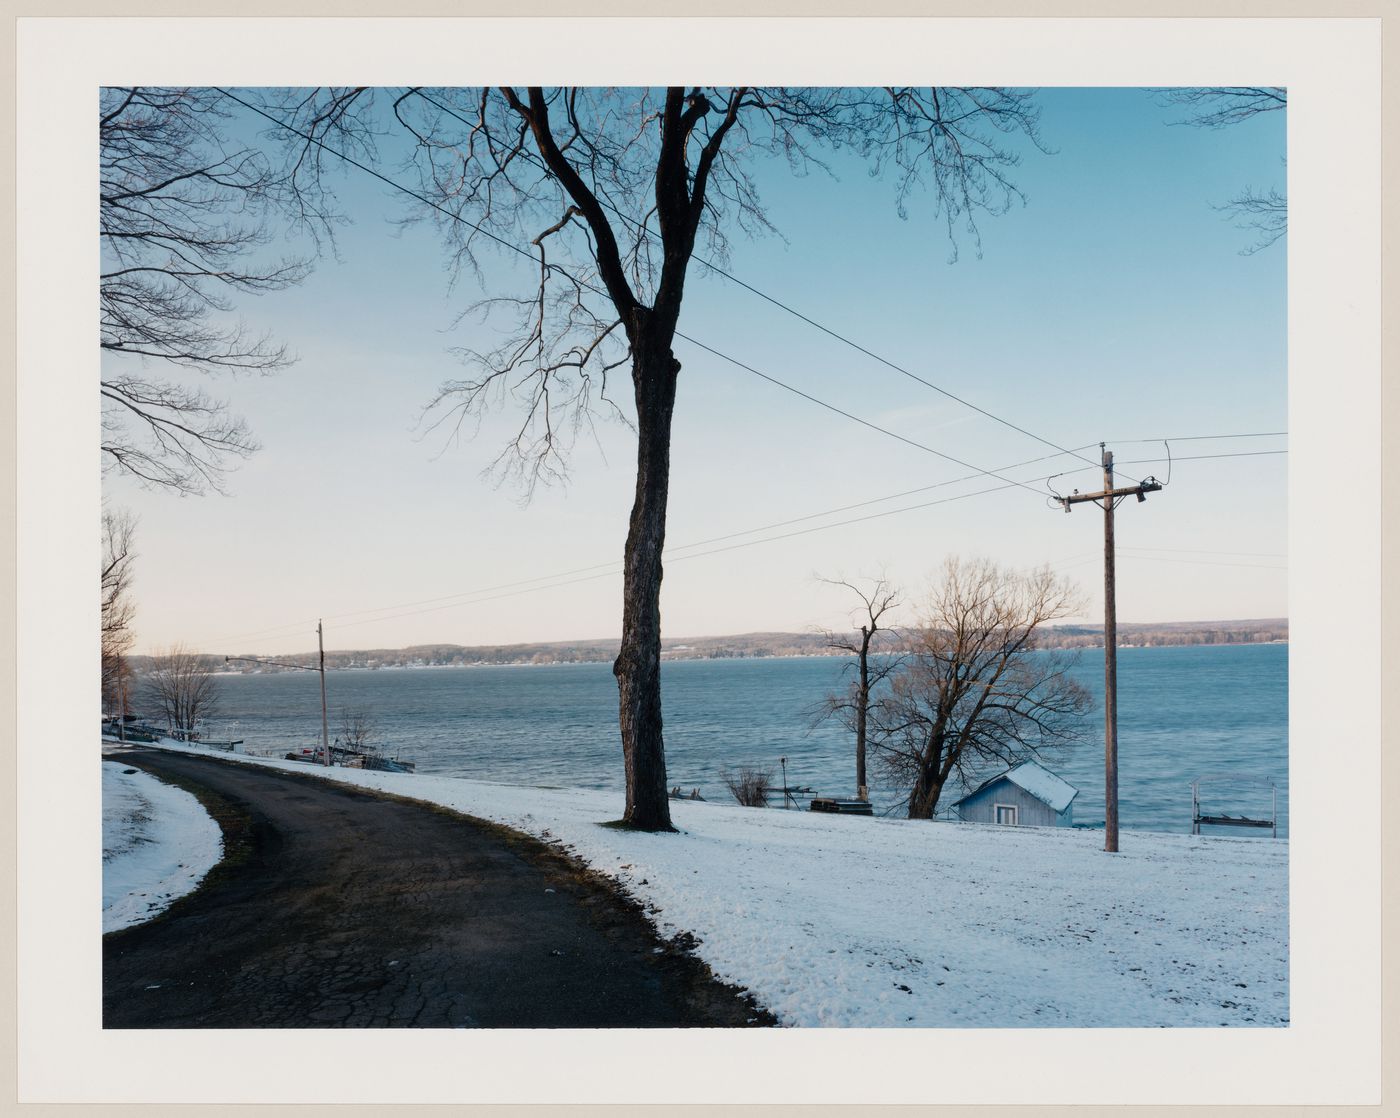 Viewing Olmsted: View of The Strand, Point Chautauqua, Mayville, New York